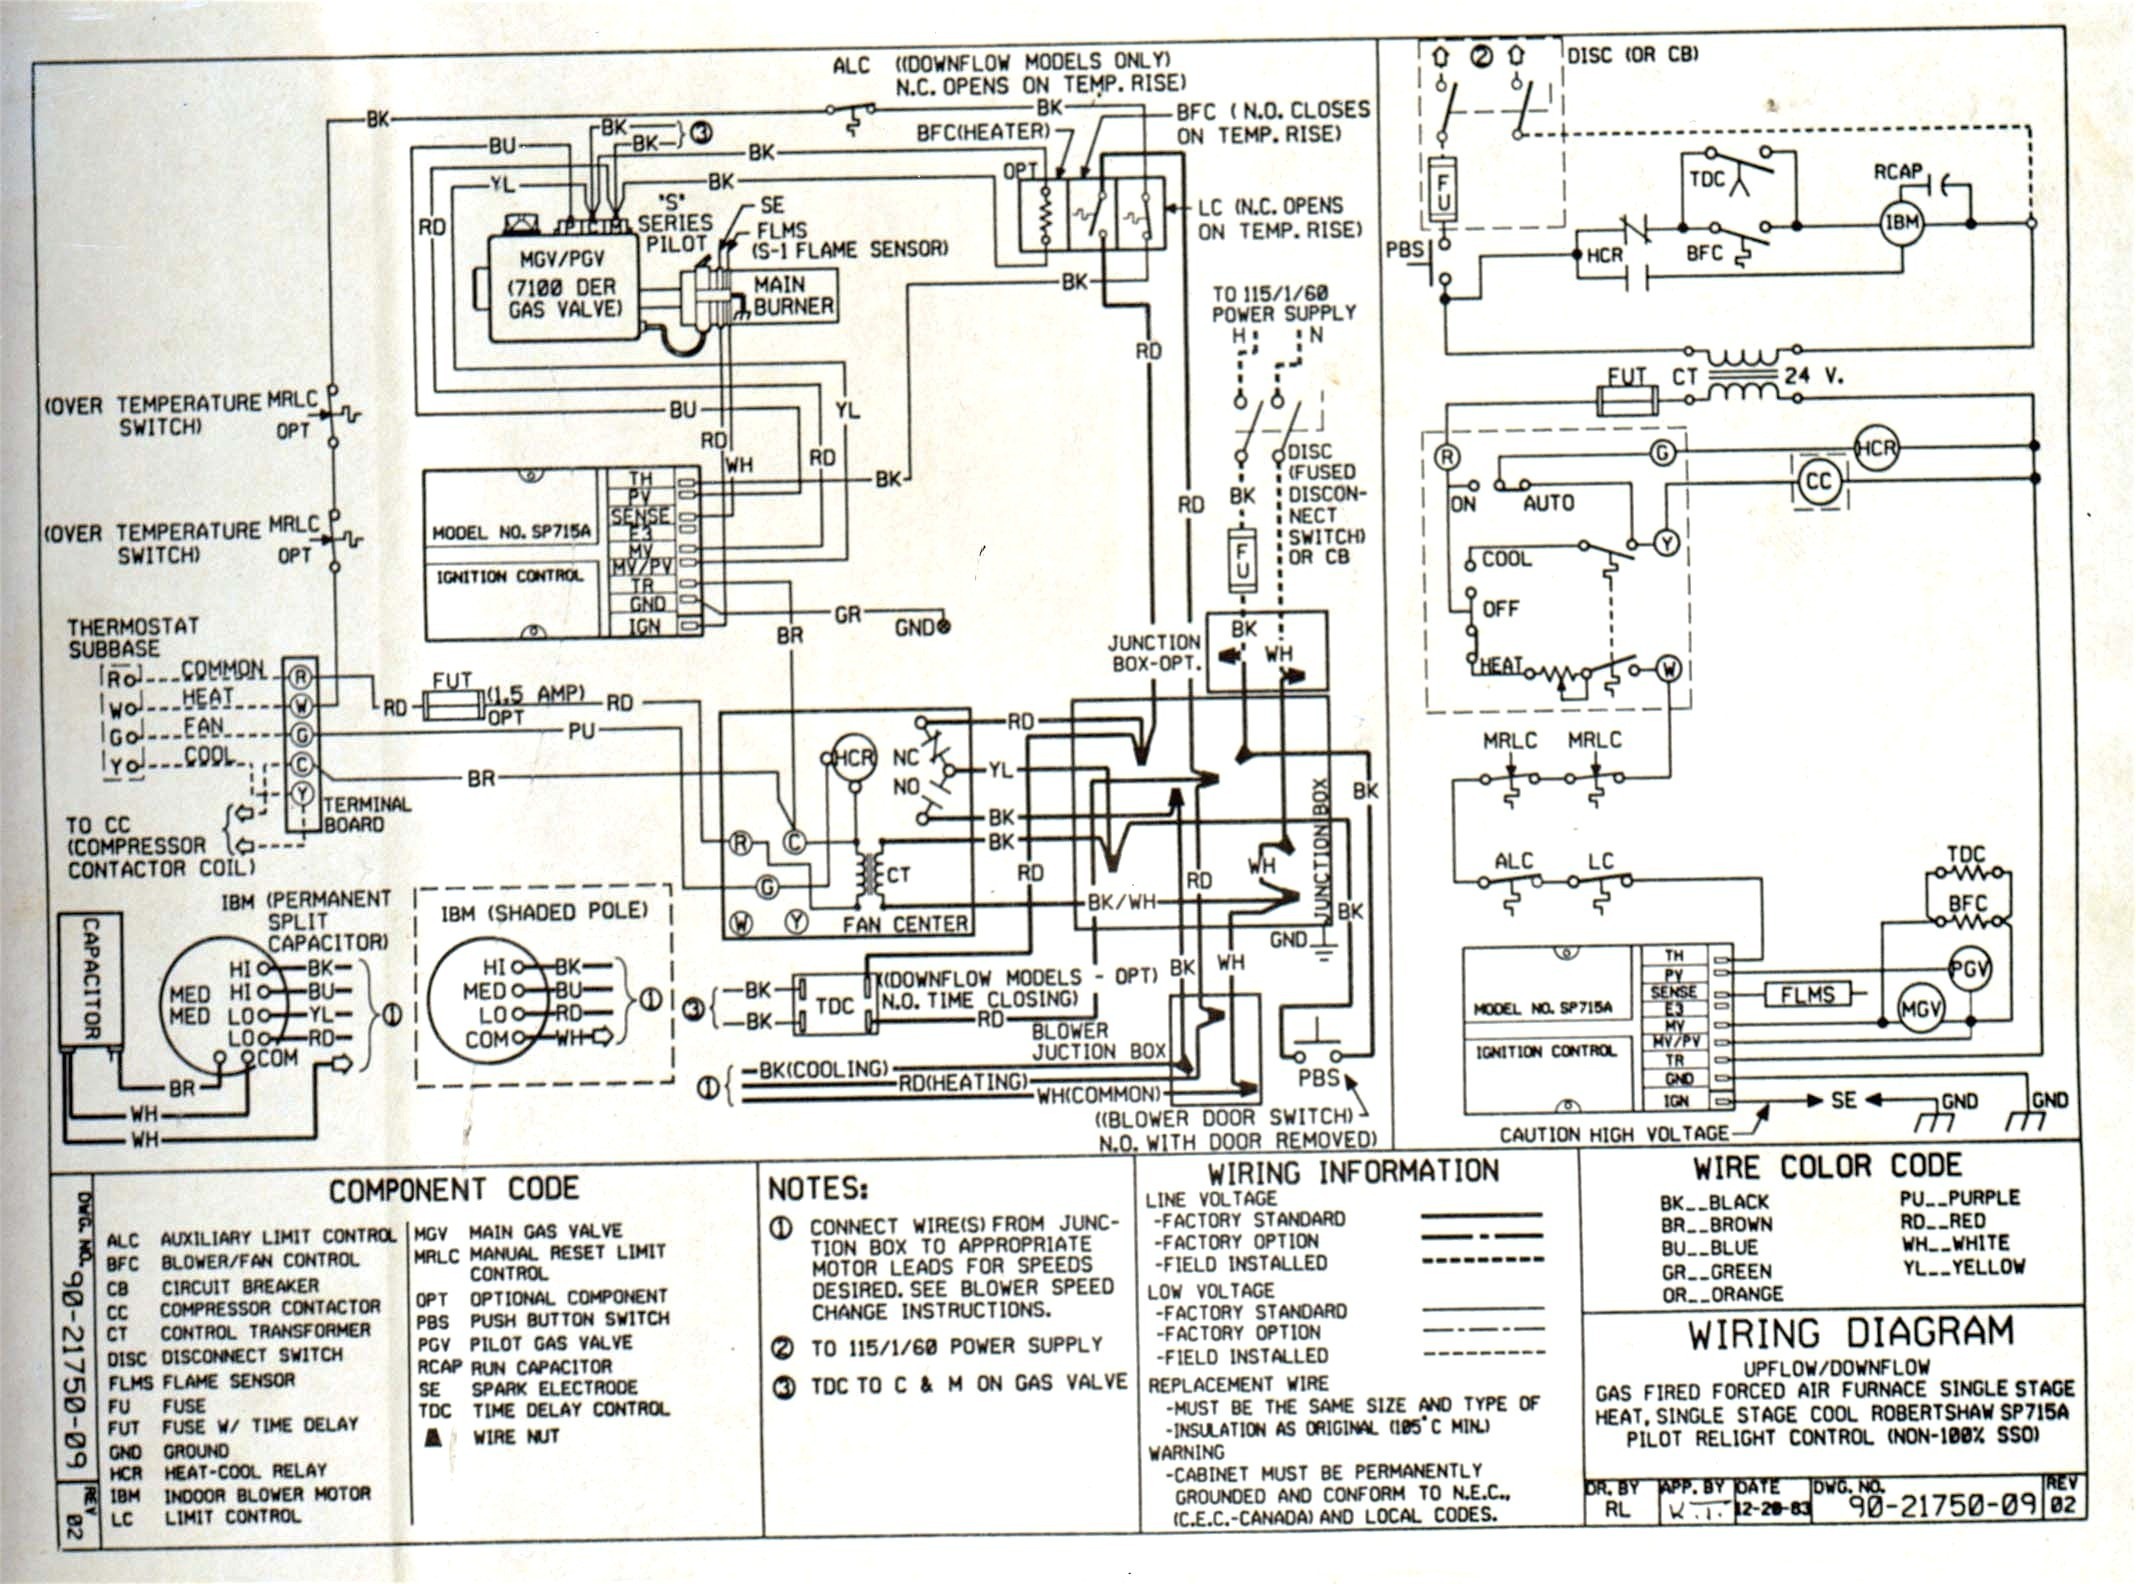 Wiring Diagram for Trane Air Conditioner Mcquay Air Conditioner Wiring Diagram Best Mcquay Wiring Diagram New